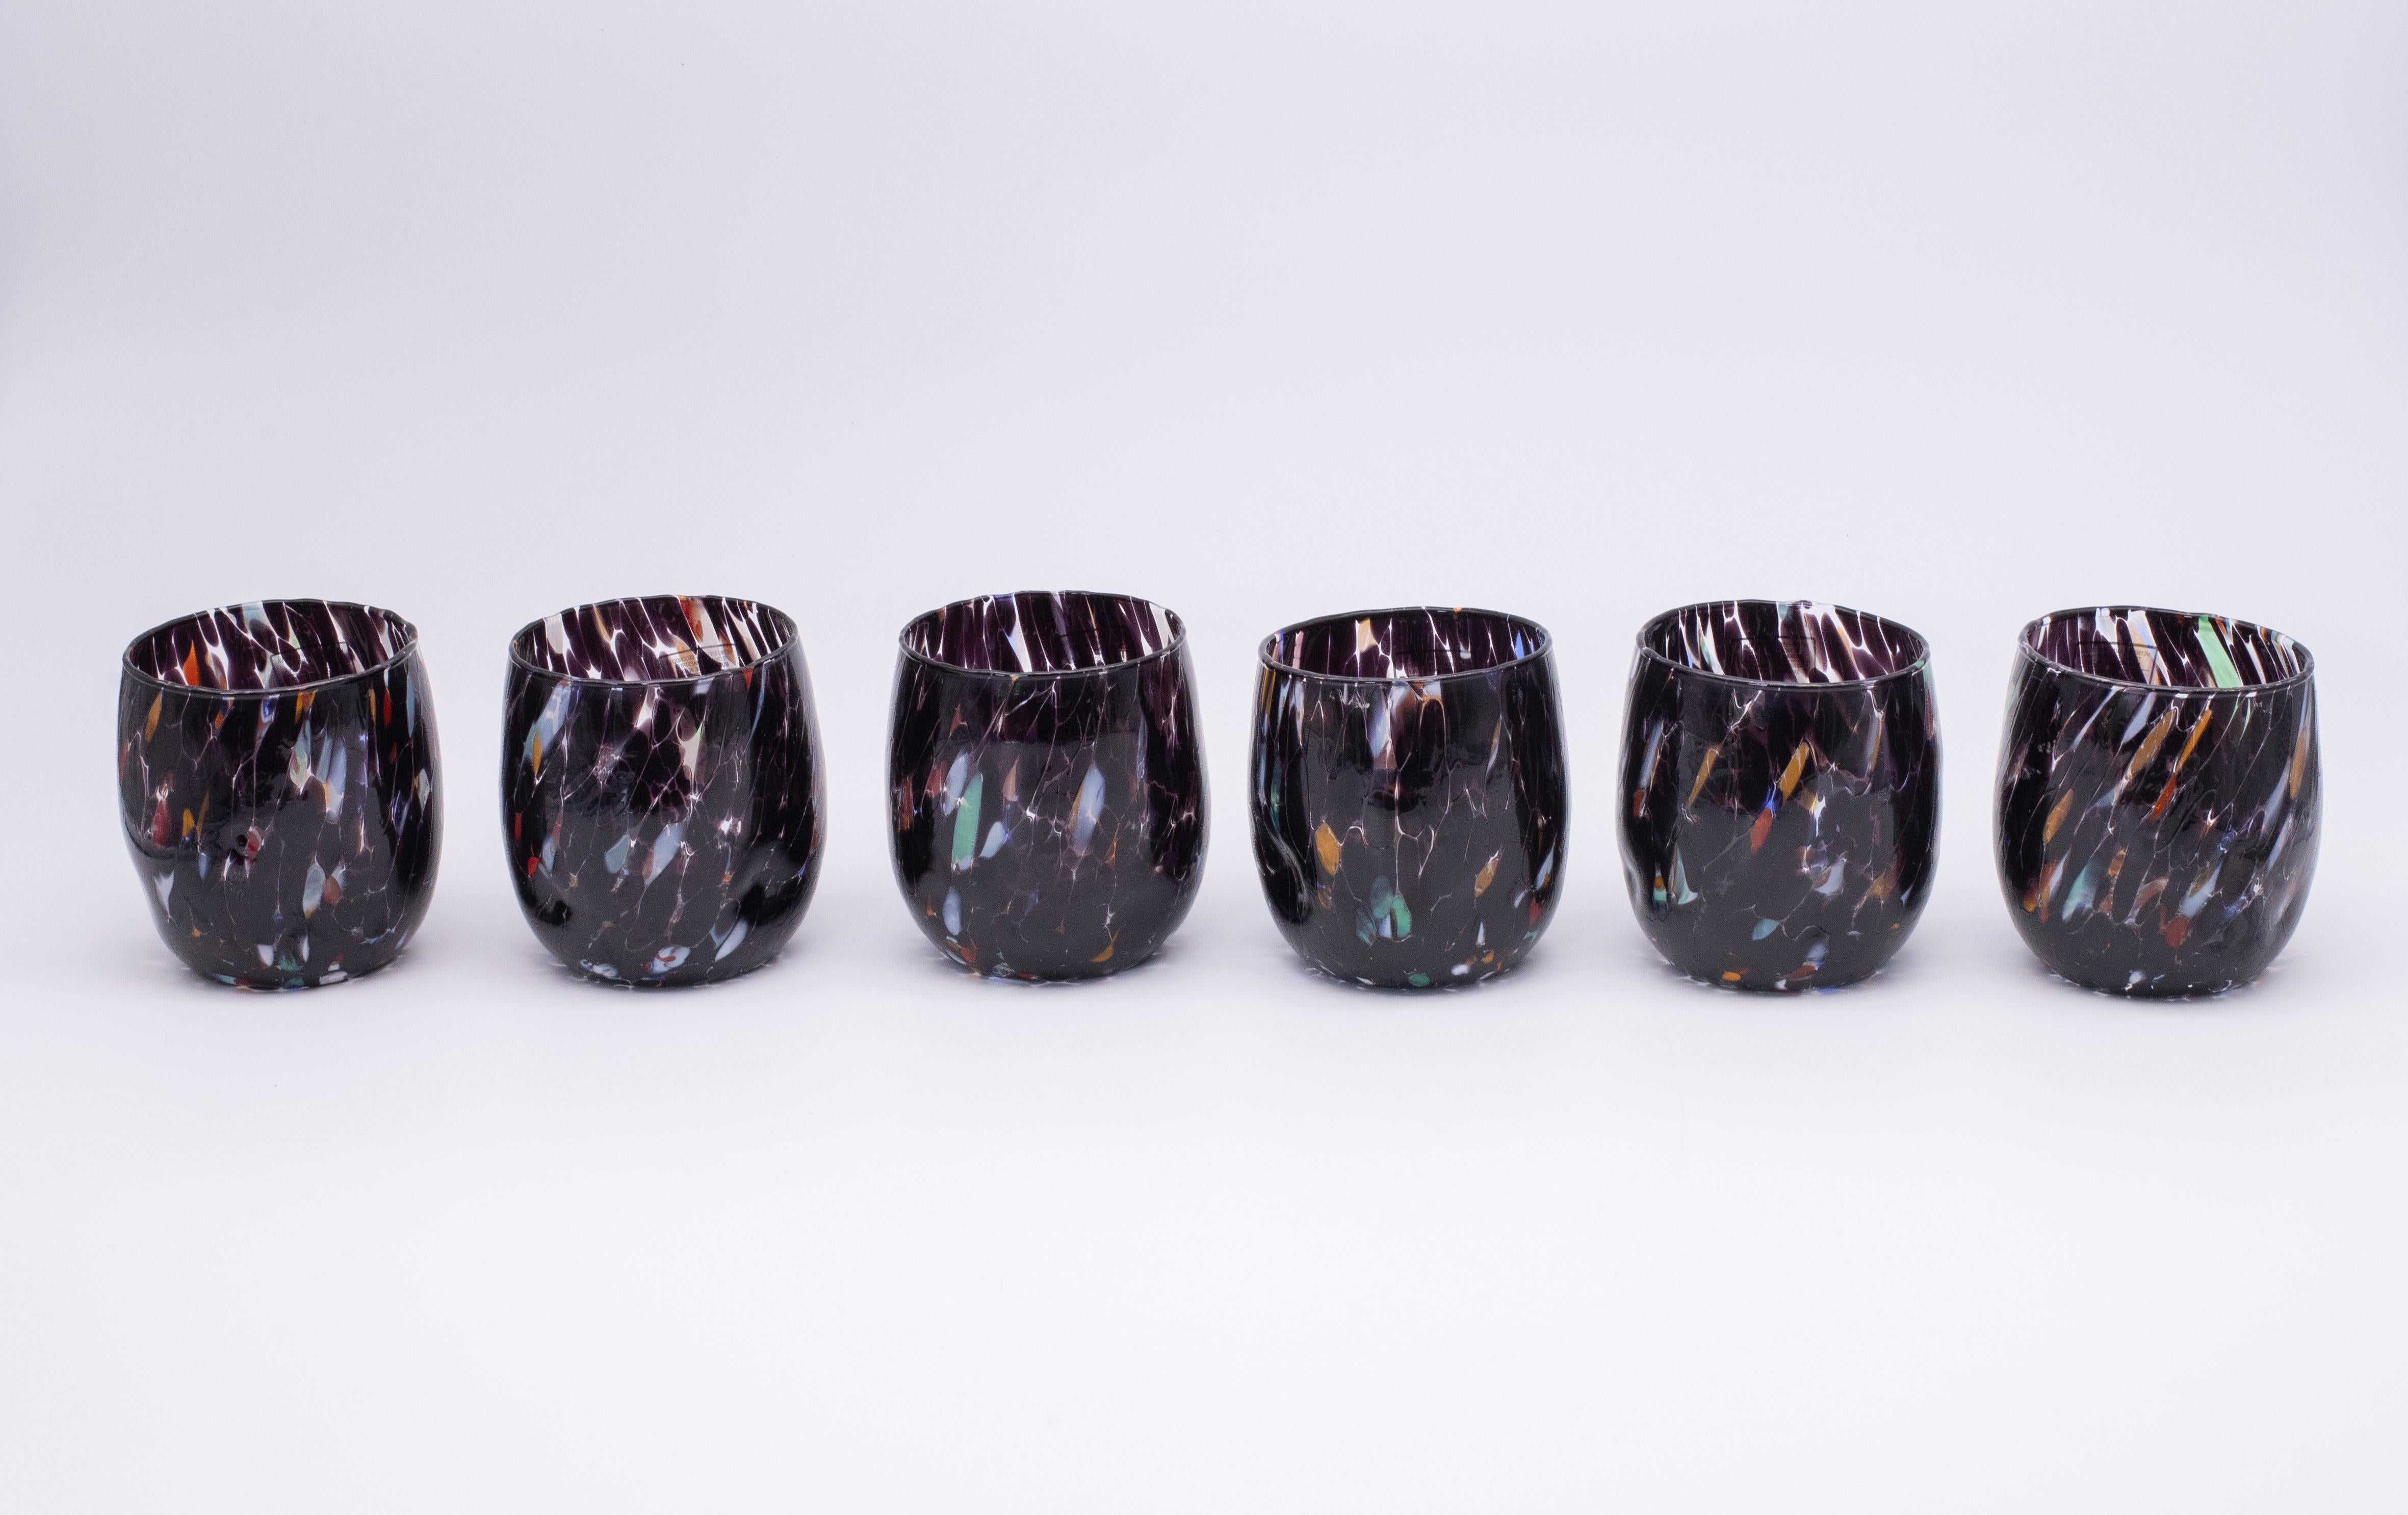 Set of six water/drink/wine glasses color Black - Murano glass - Made in Italy.

These individual Murano glasses are inspired by the classic 